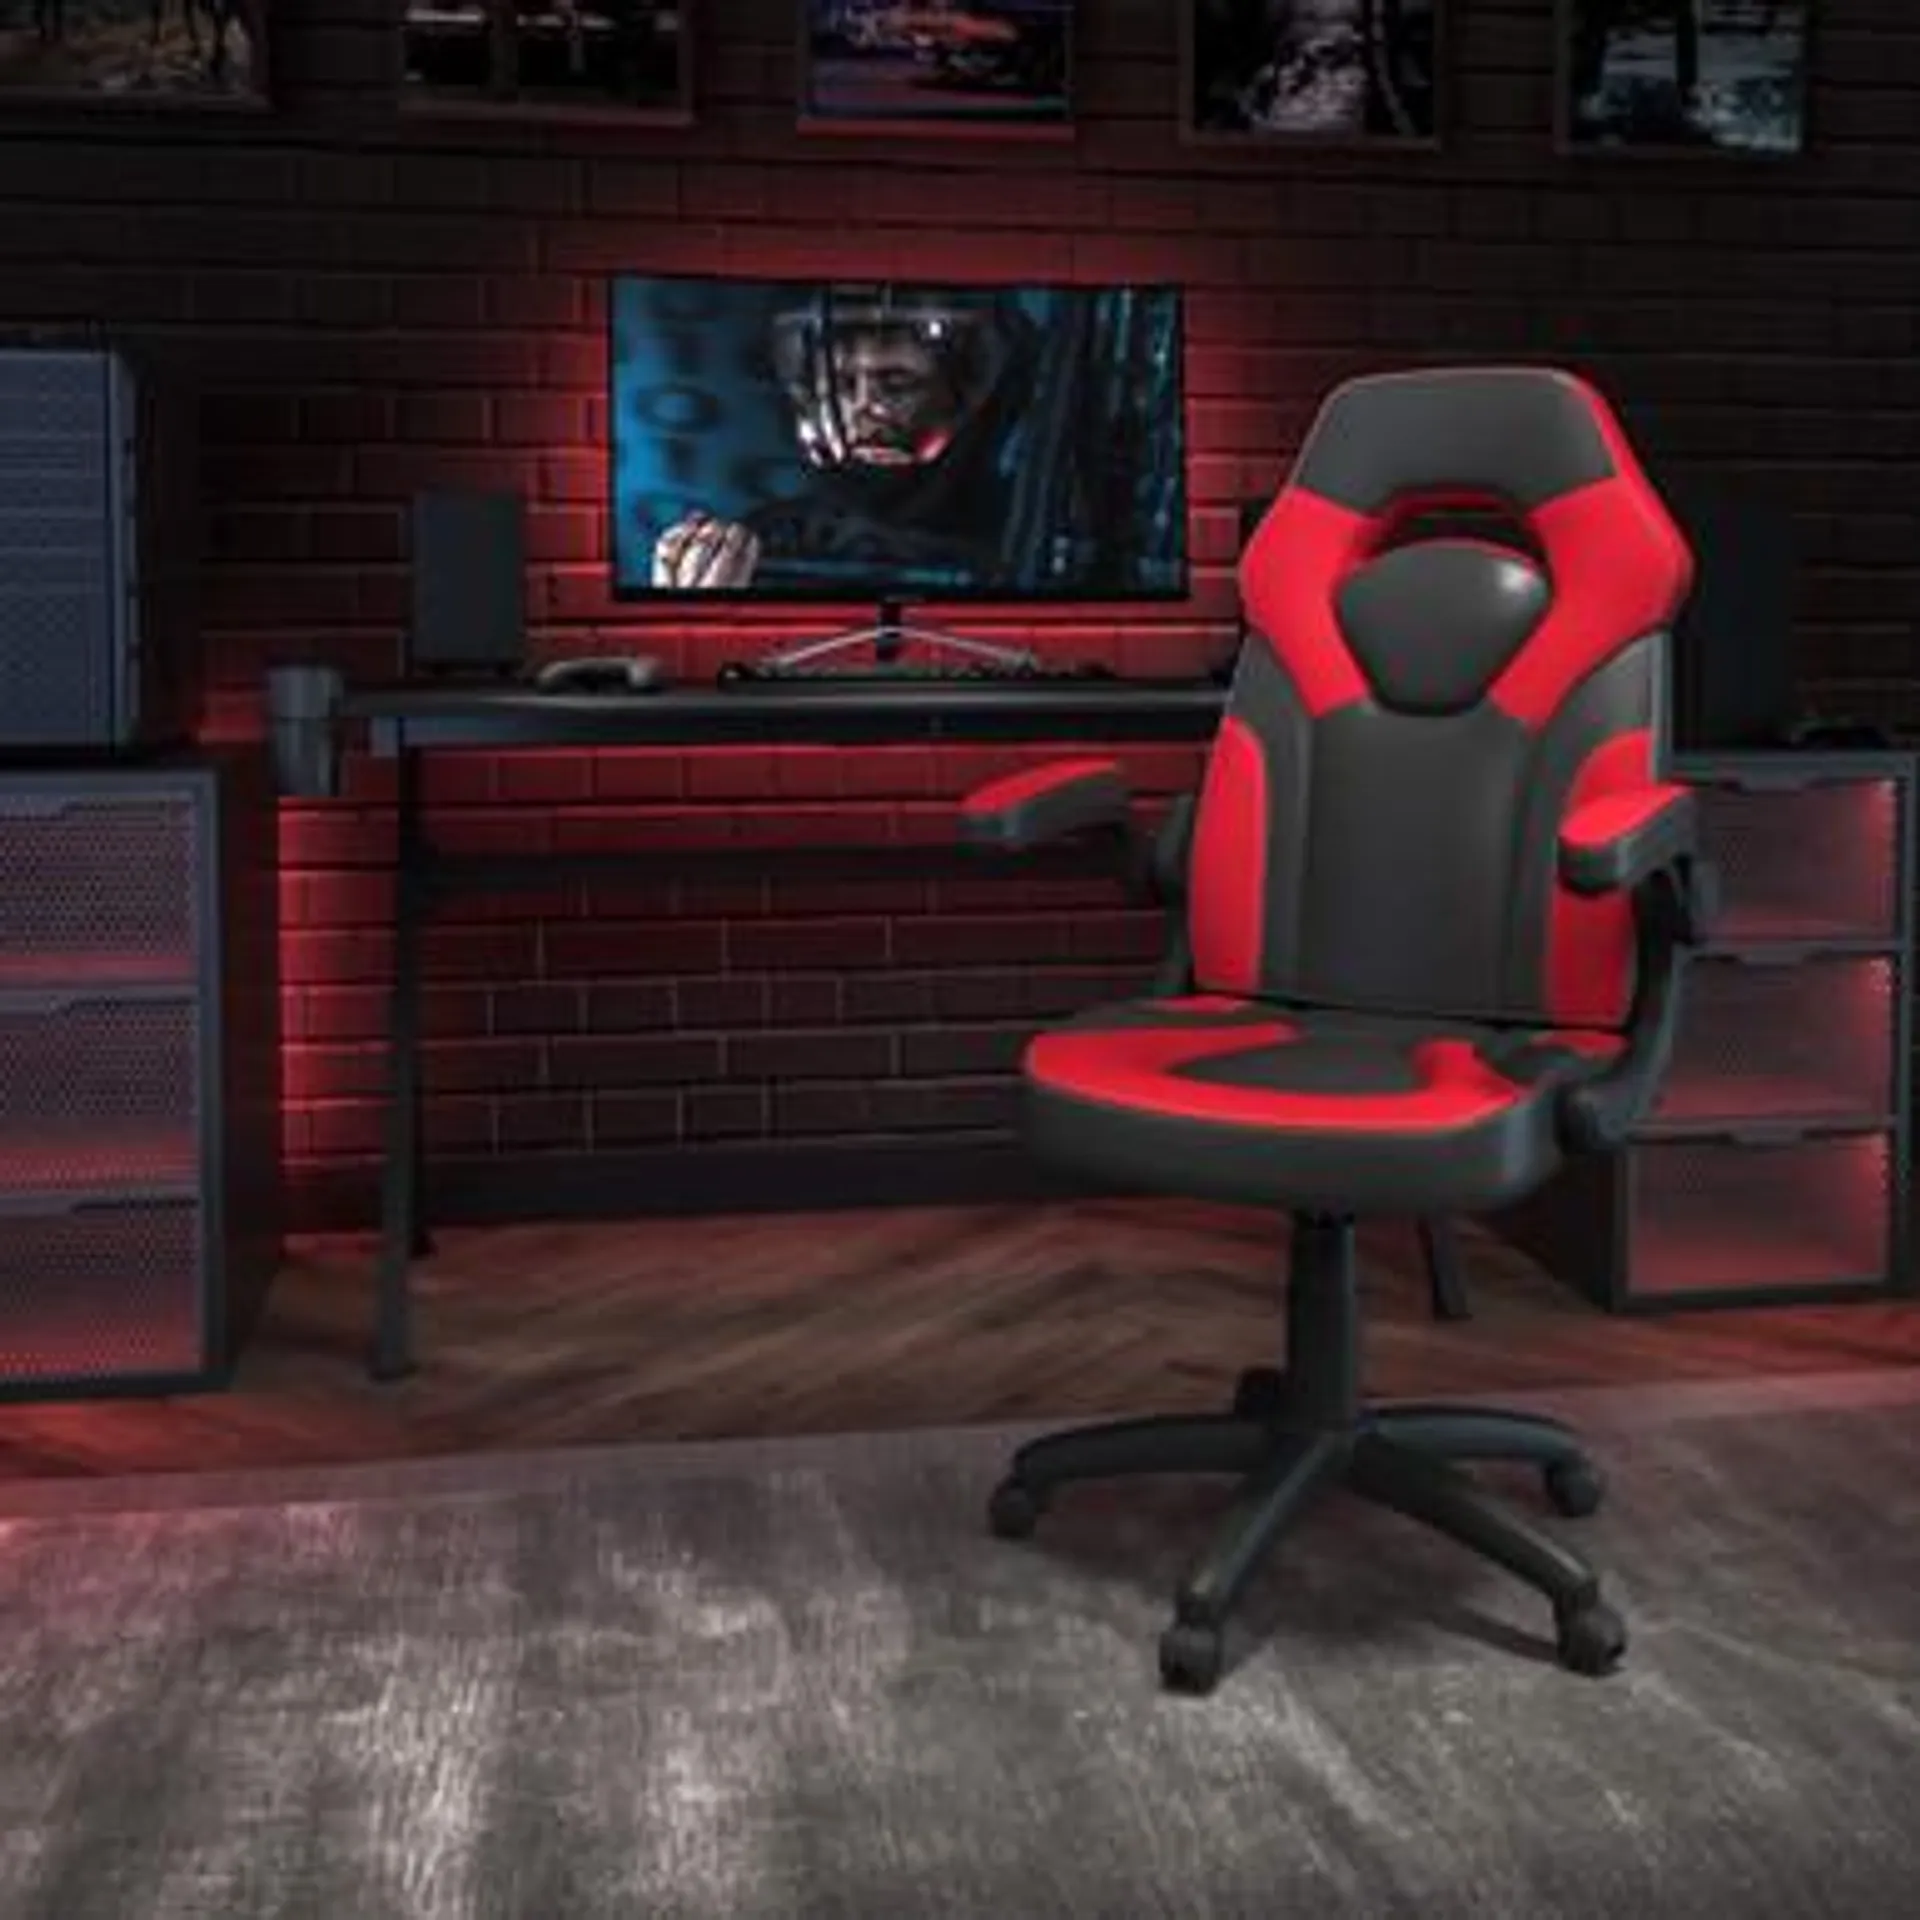 X10 Gaming Chair Racing Ergonomic Computer PC Adjustable Swivel Chair with Flip-up Arms, Red/Black LeatherSoft